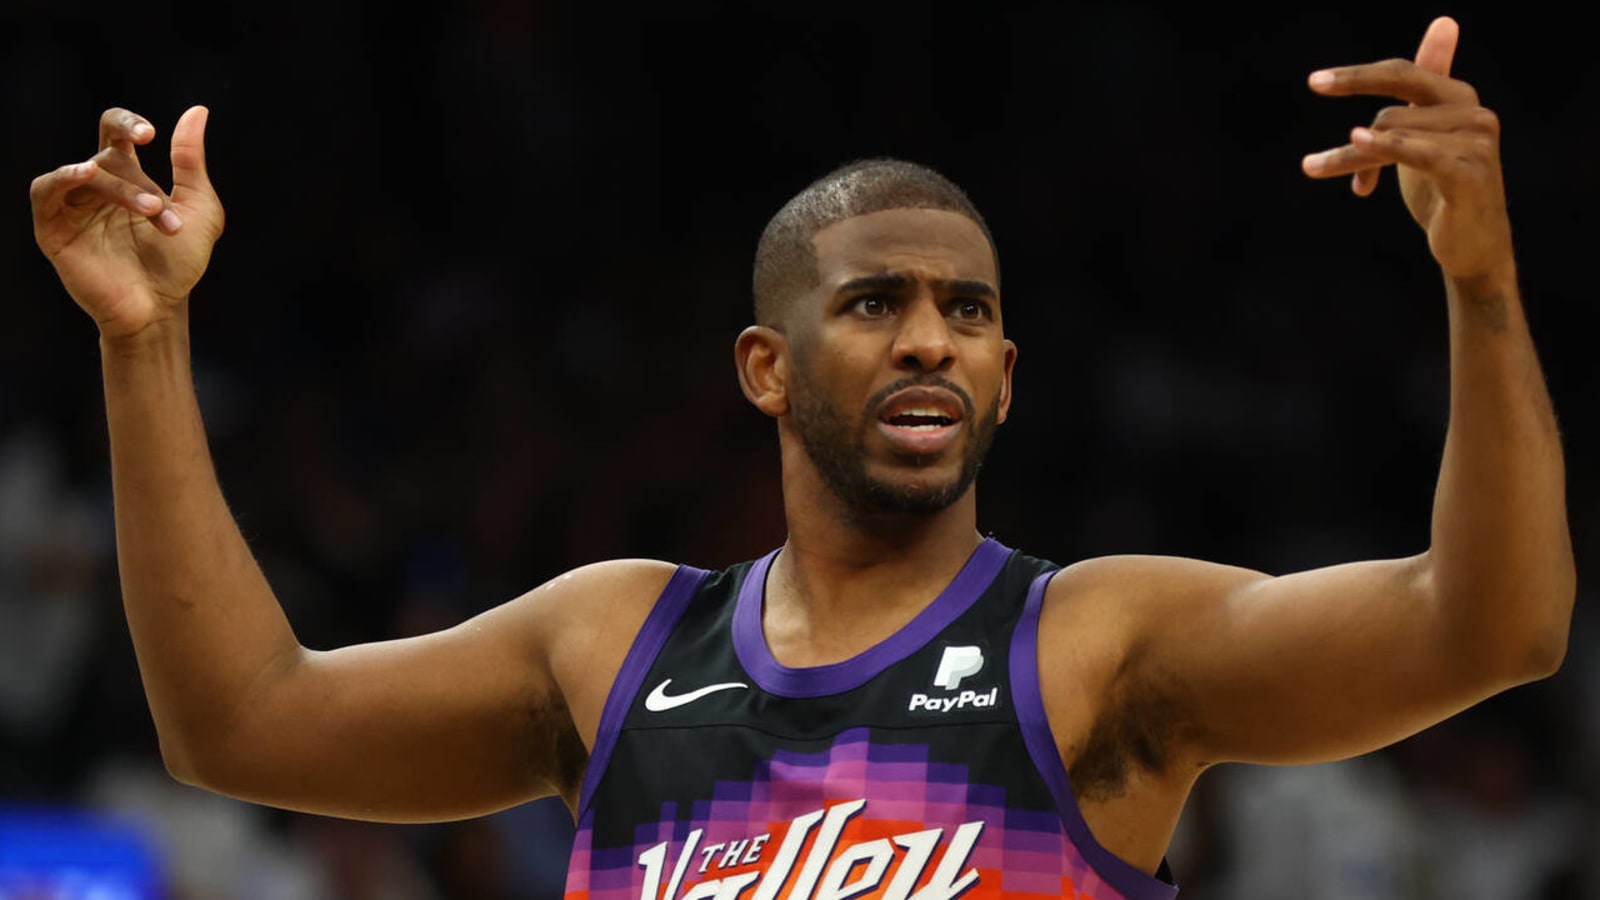 Watch: Chris Paul's funny interaction with young fan